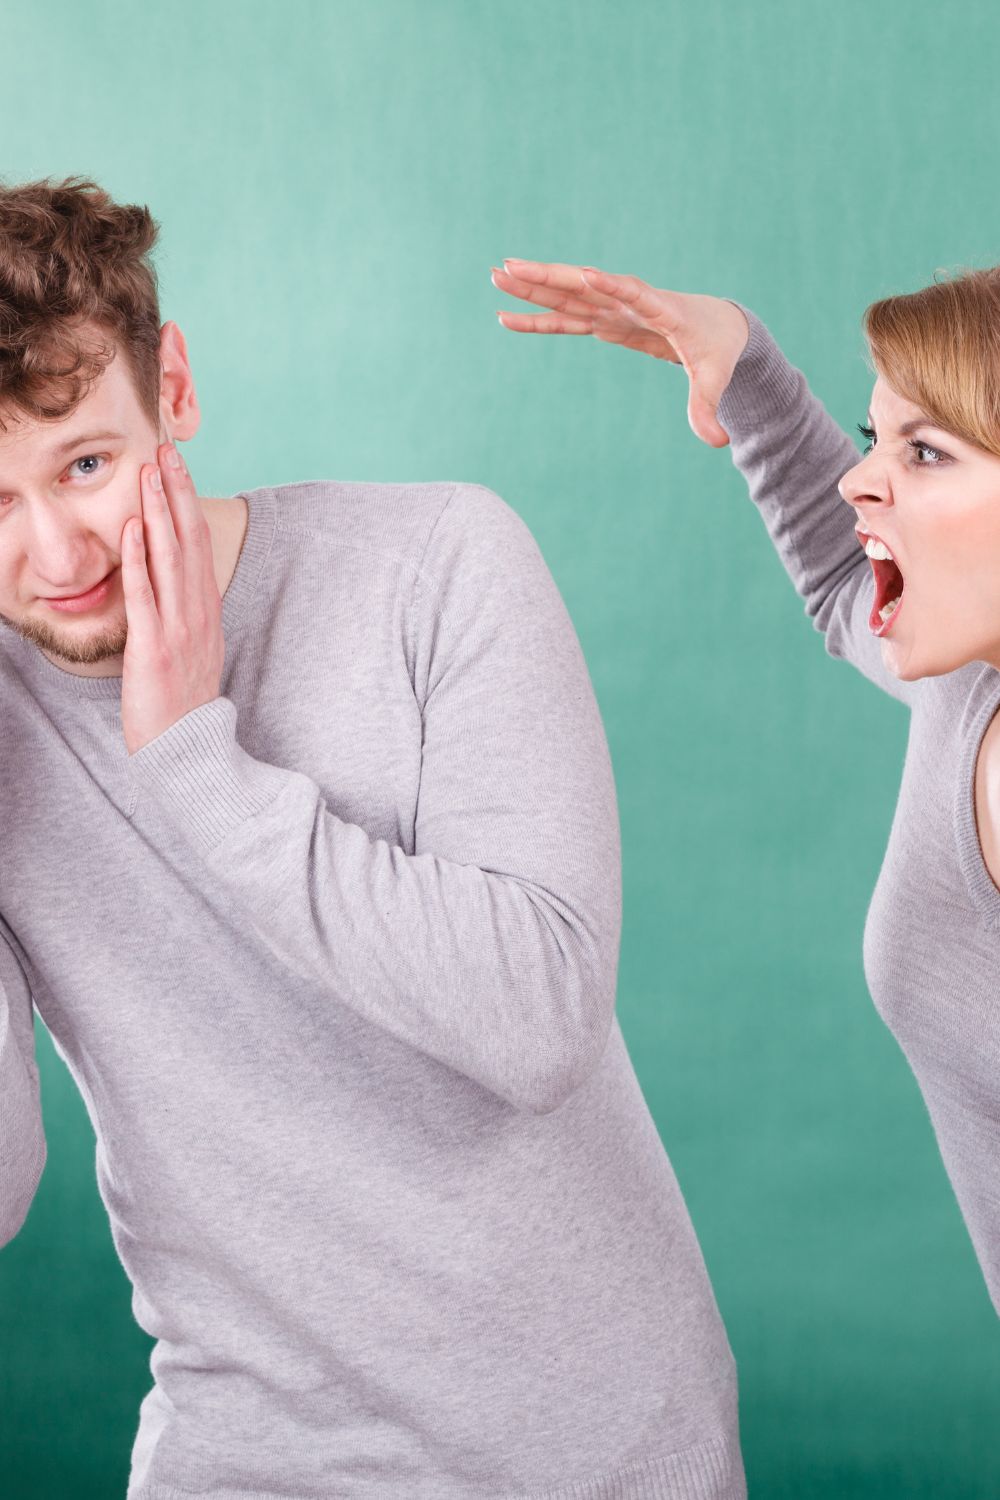 things a married woman should never say to her husband